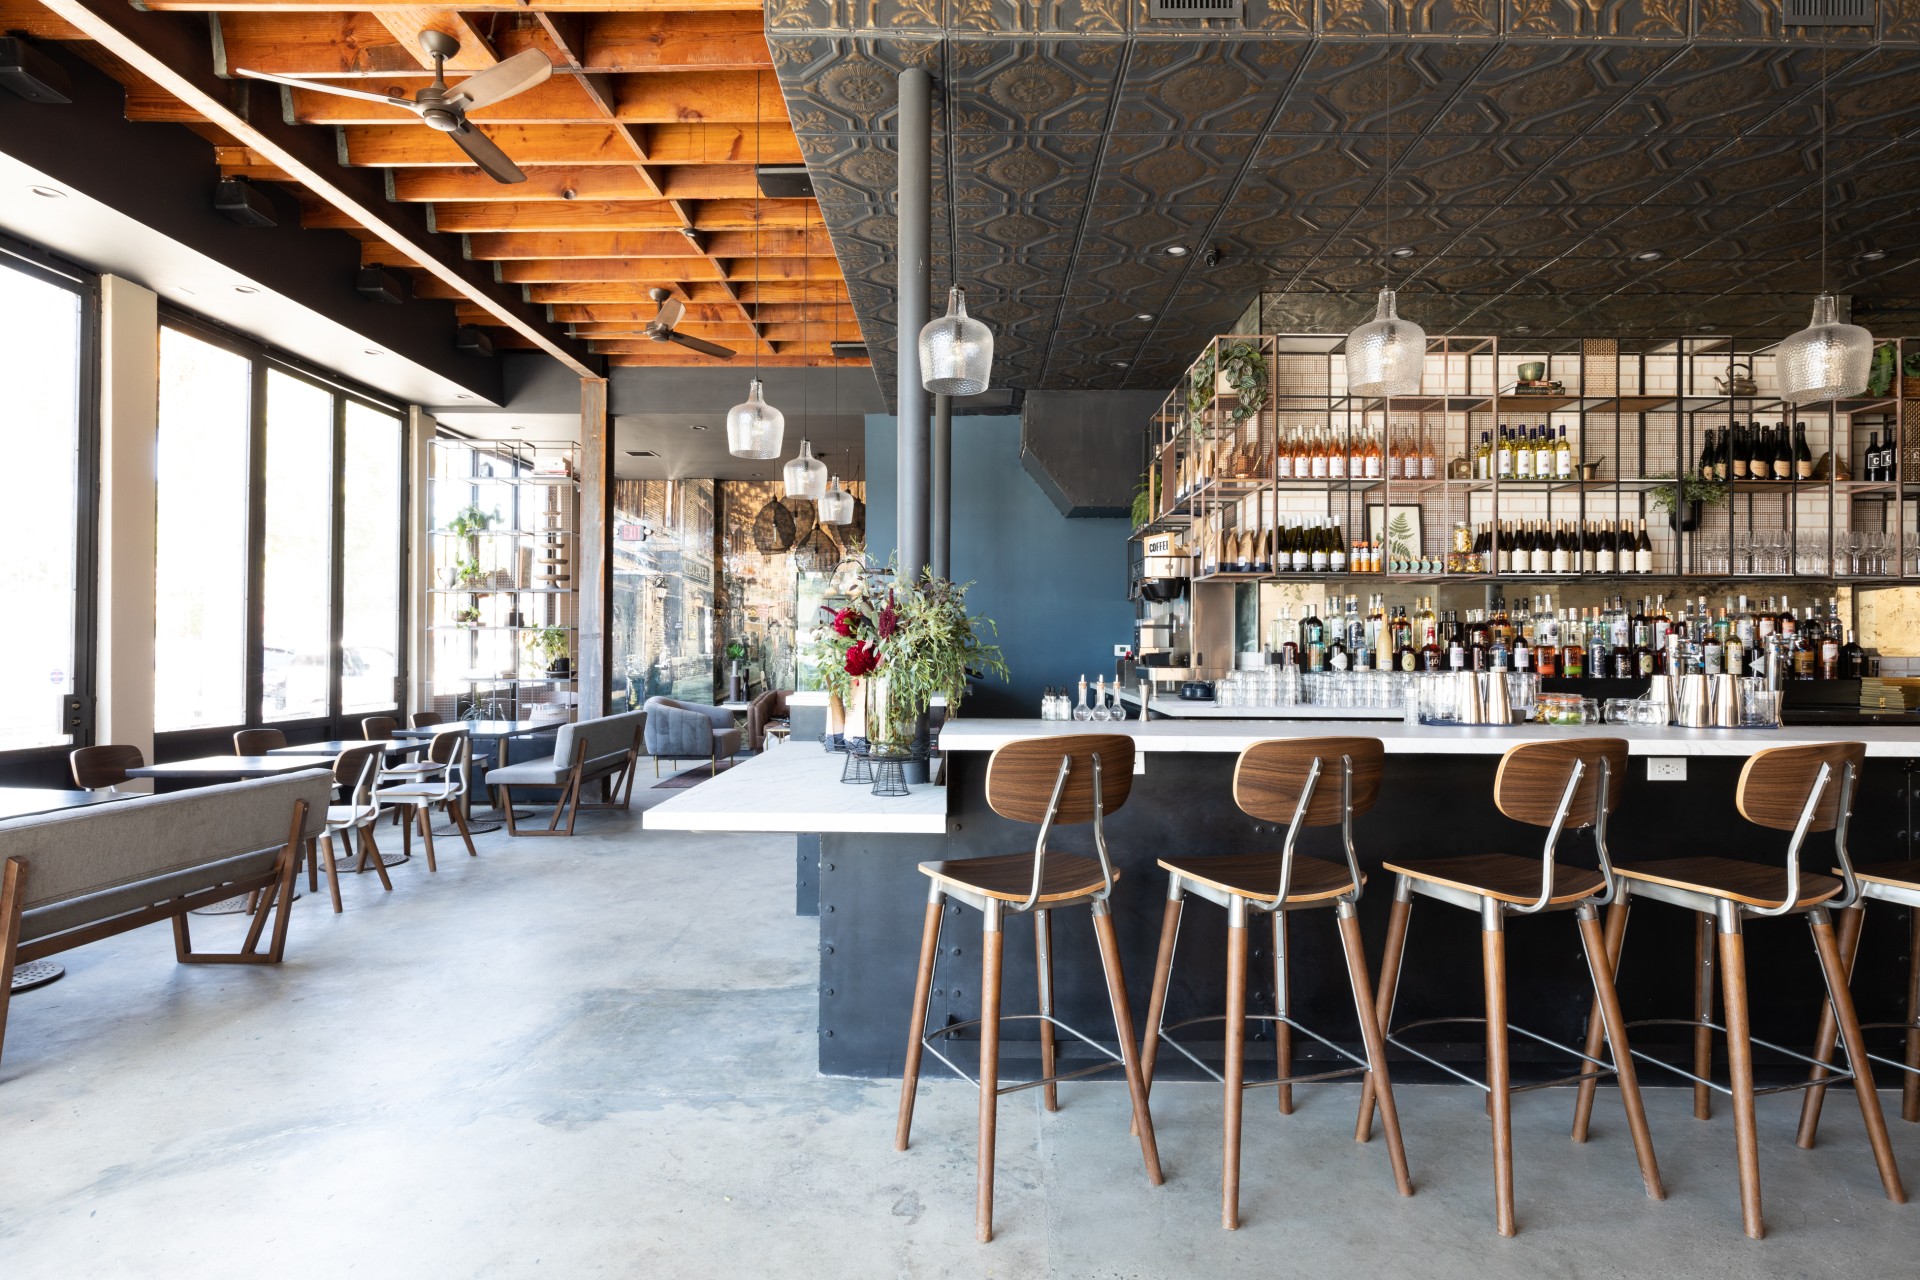 THE ALL DAY DINING, COCKTAIL BAR, and COFFEE SHOP CONCEPT &#8211; STONE STREET LA &#8211; MAKE ITS ANTICIPATED DEBUT IN WEST HOLLYWOOD